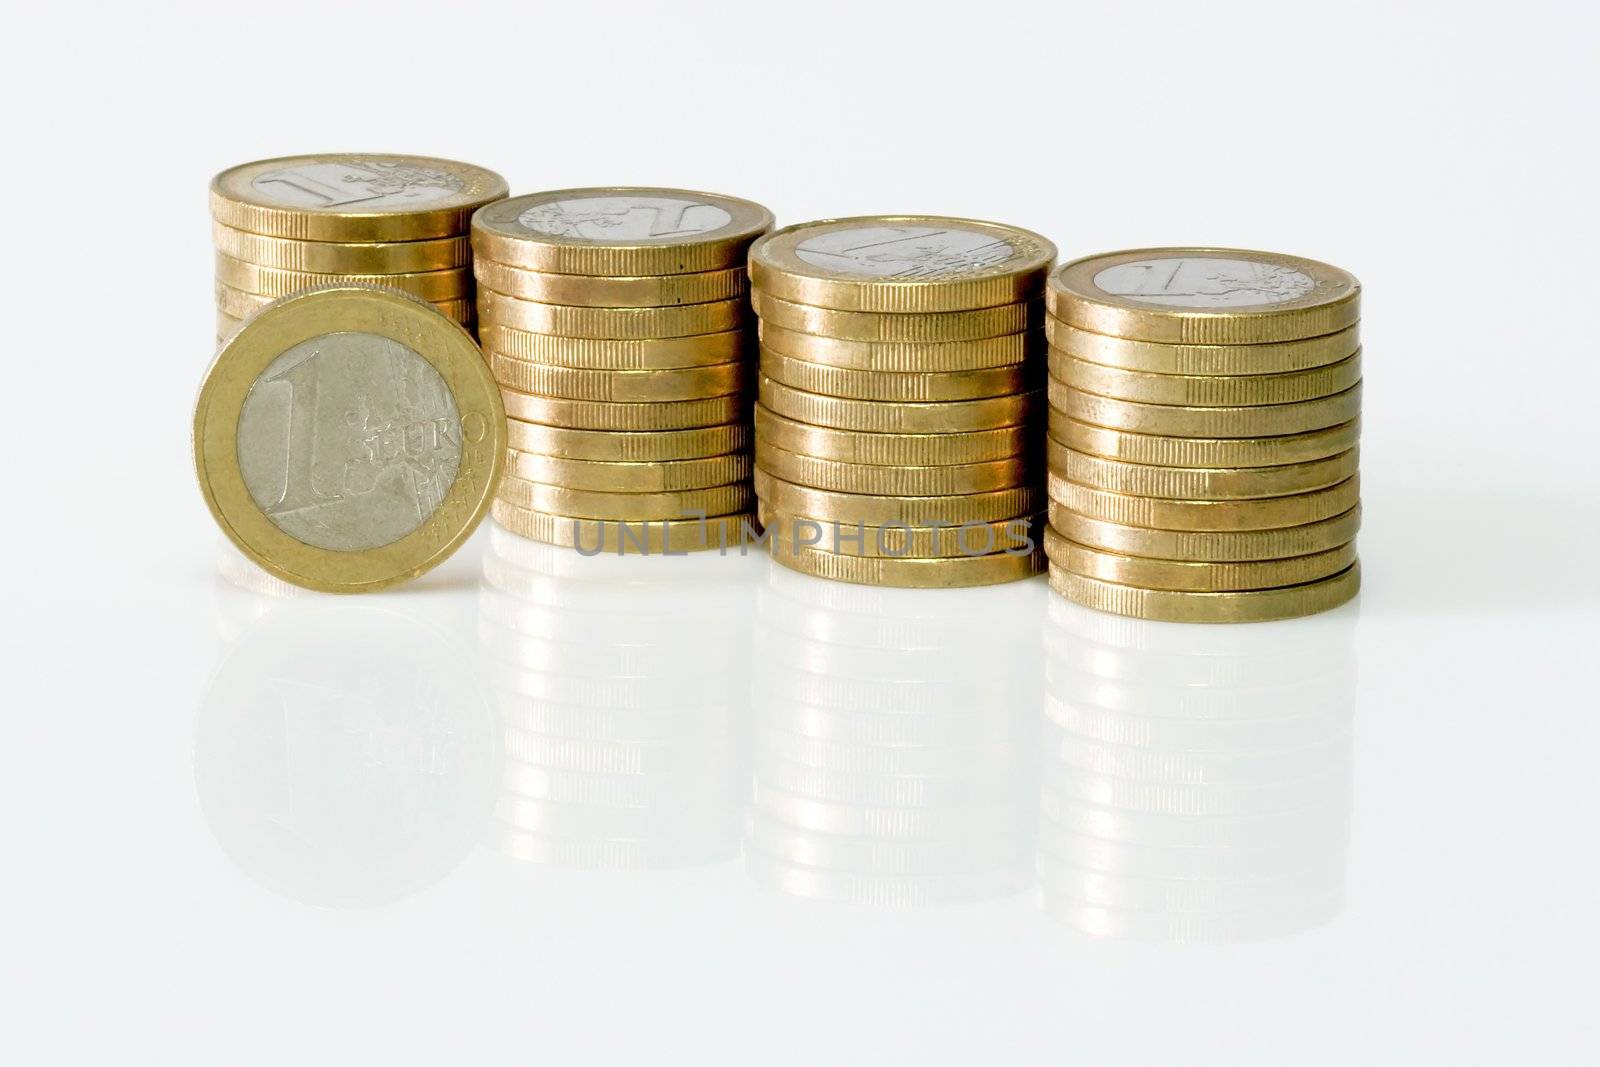 Stacked Euro Coins by Teamarbeit